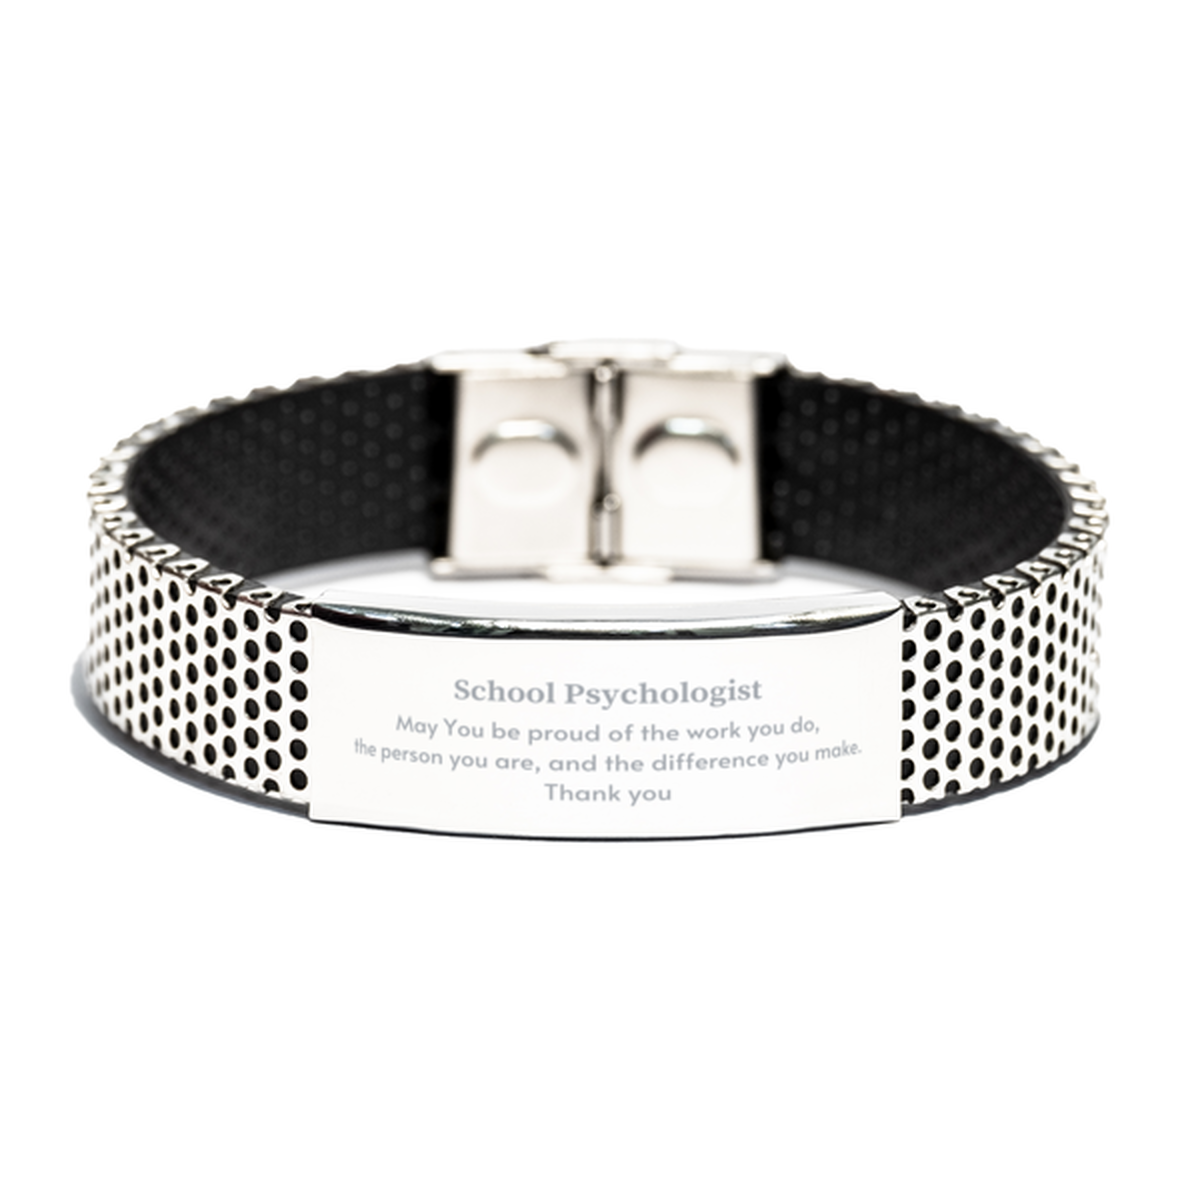 Heartwarming Stainless Steel Bracelet Retirement Coworkers Gifts for School Psychologist, School Psychologist May You be proud of the work you do, the person you are Gifts for Boss Men Women Friends